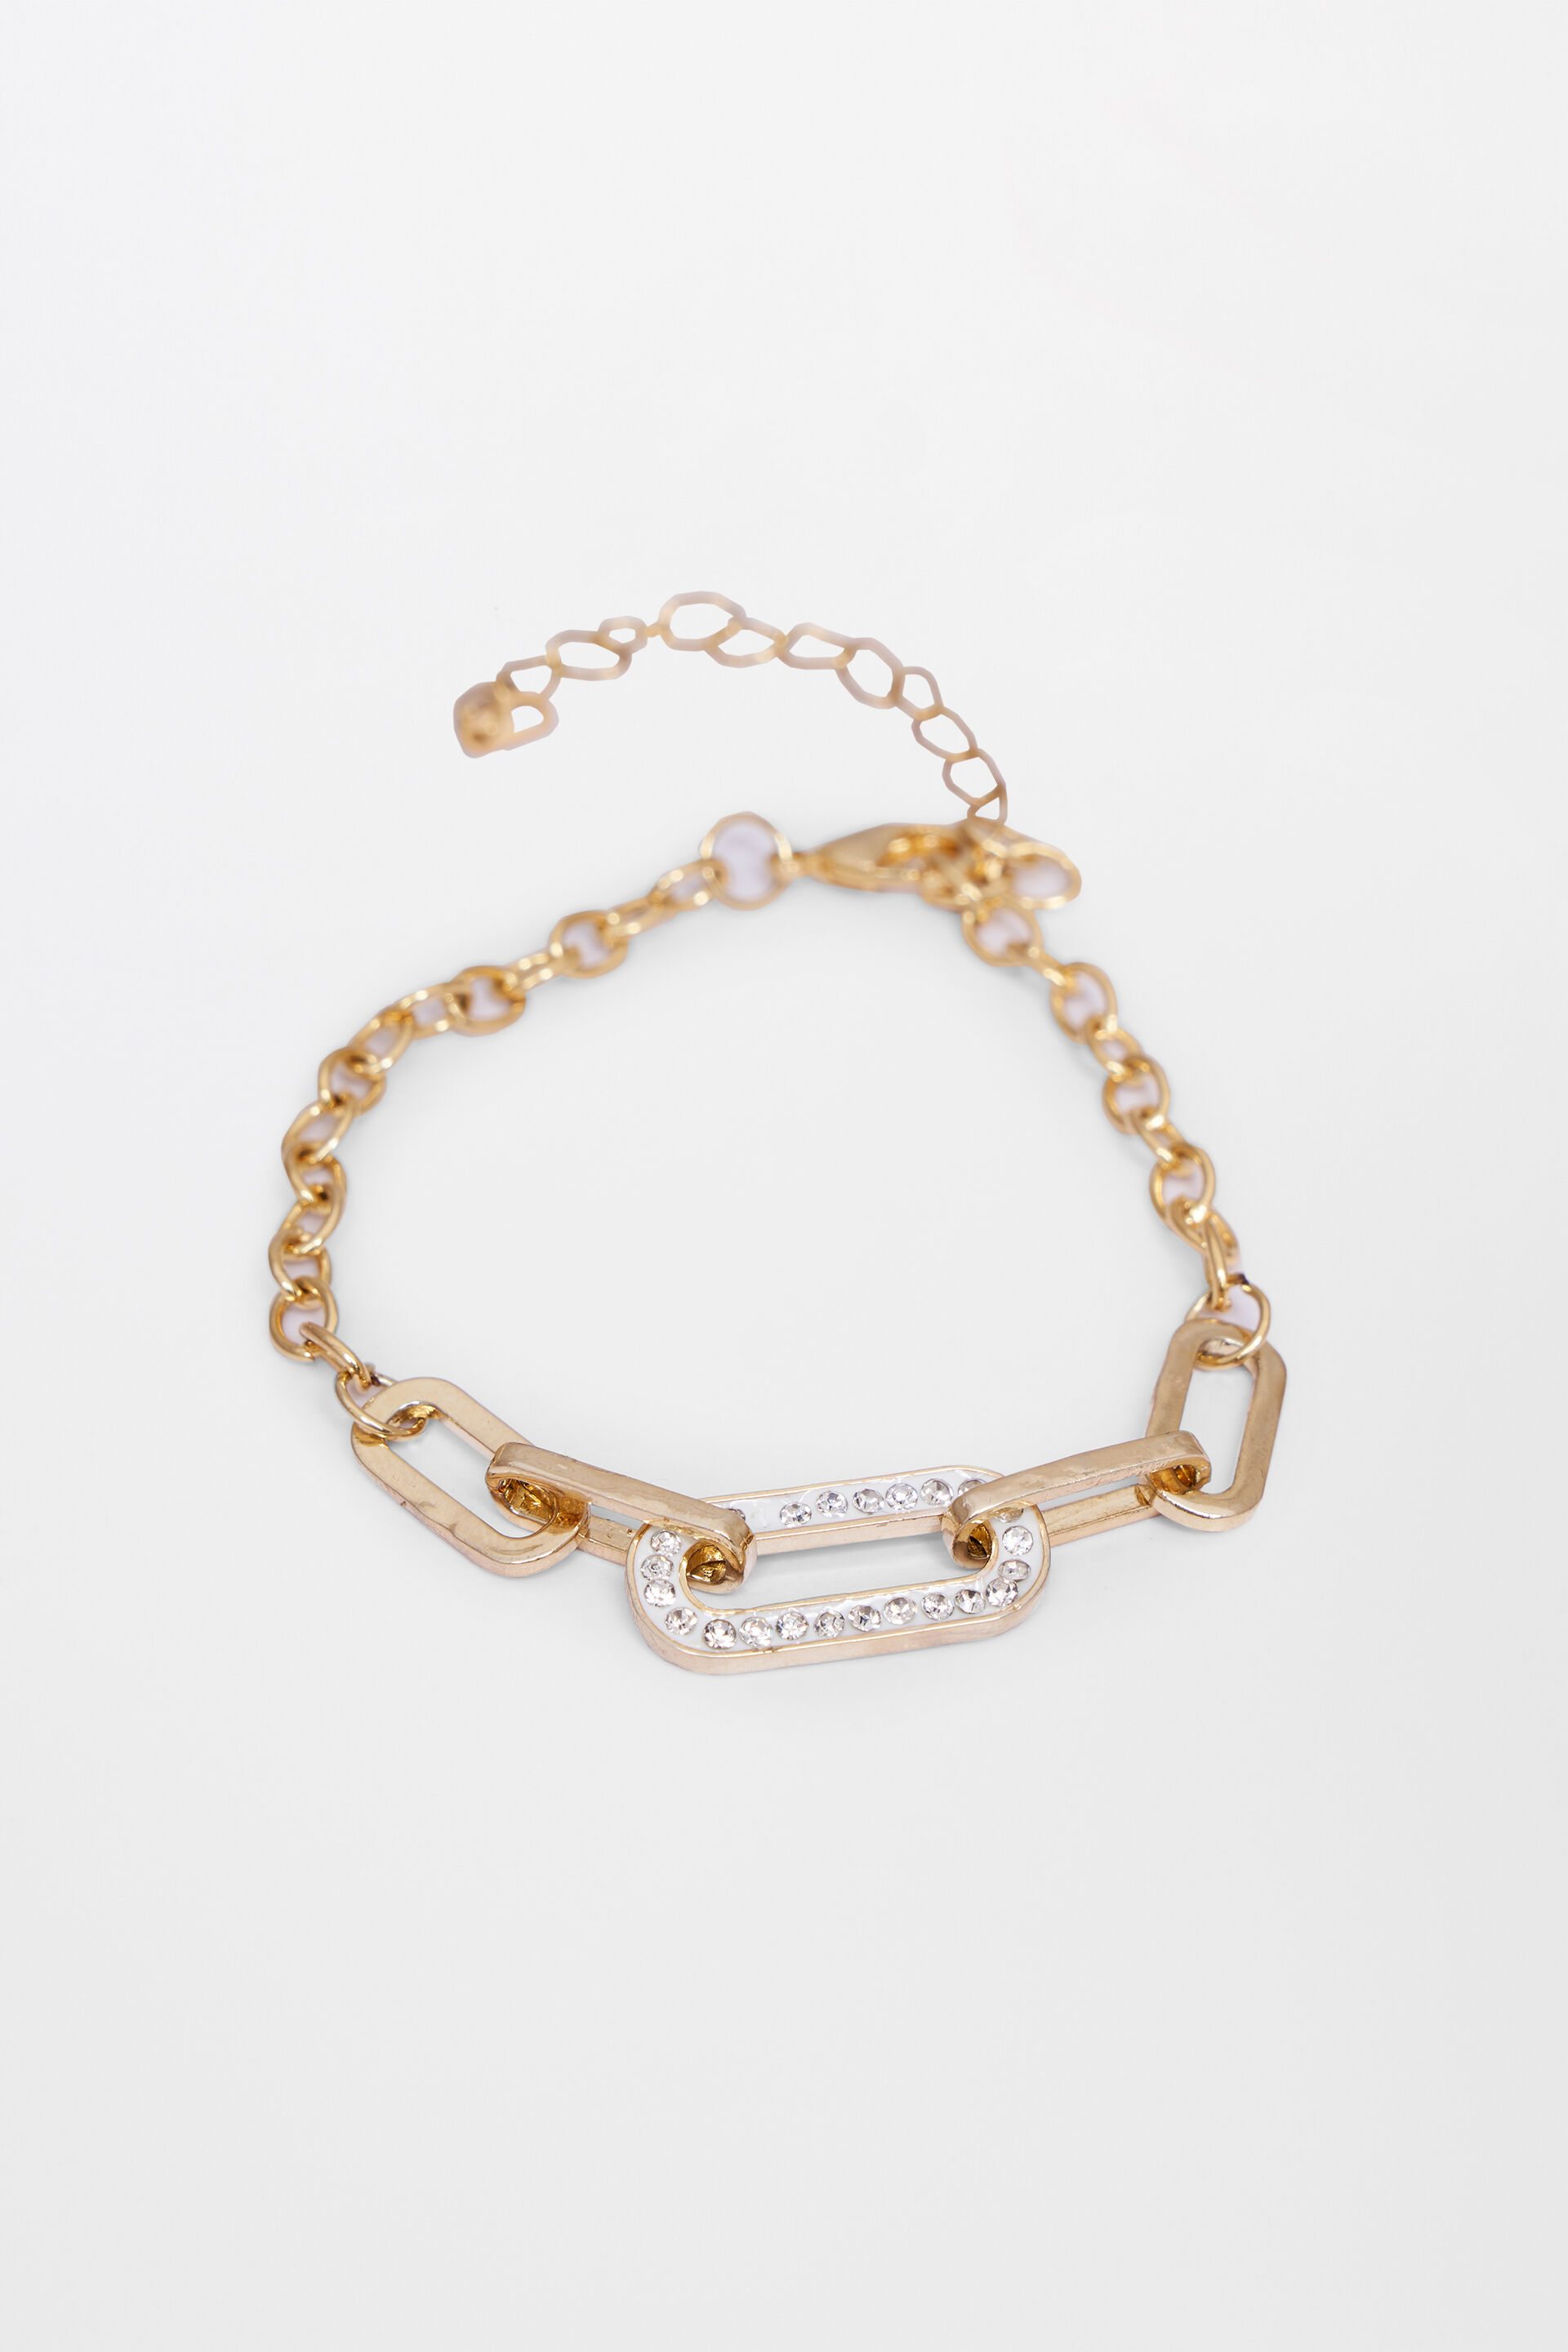 10 Best Bracelet Picks to Add a Hint of Shine to Your Everyday Look